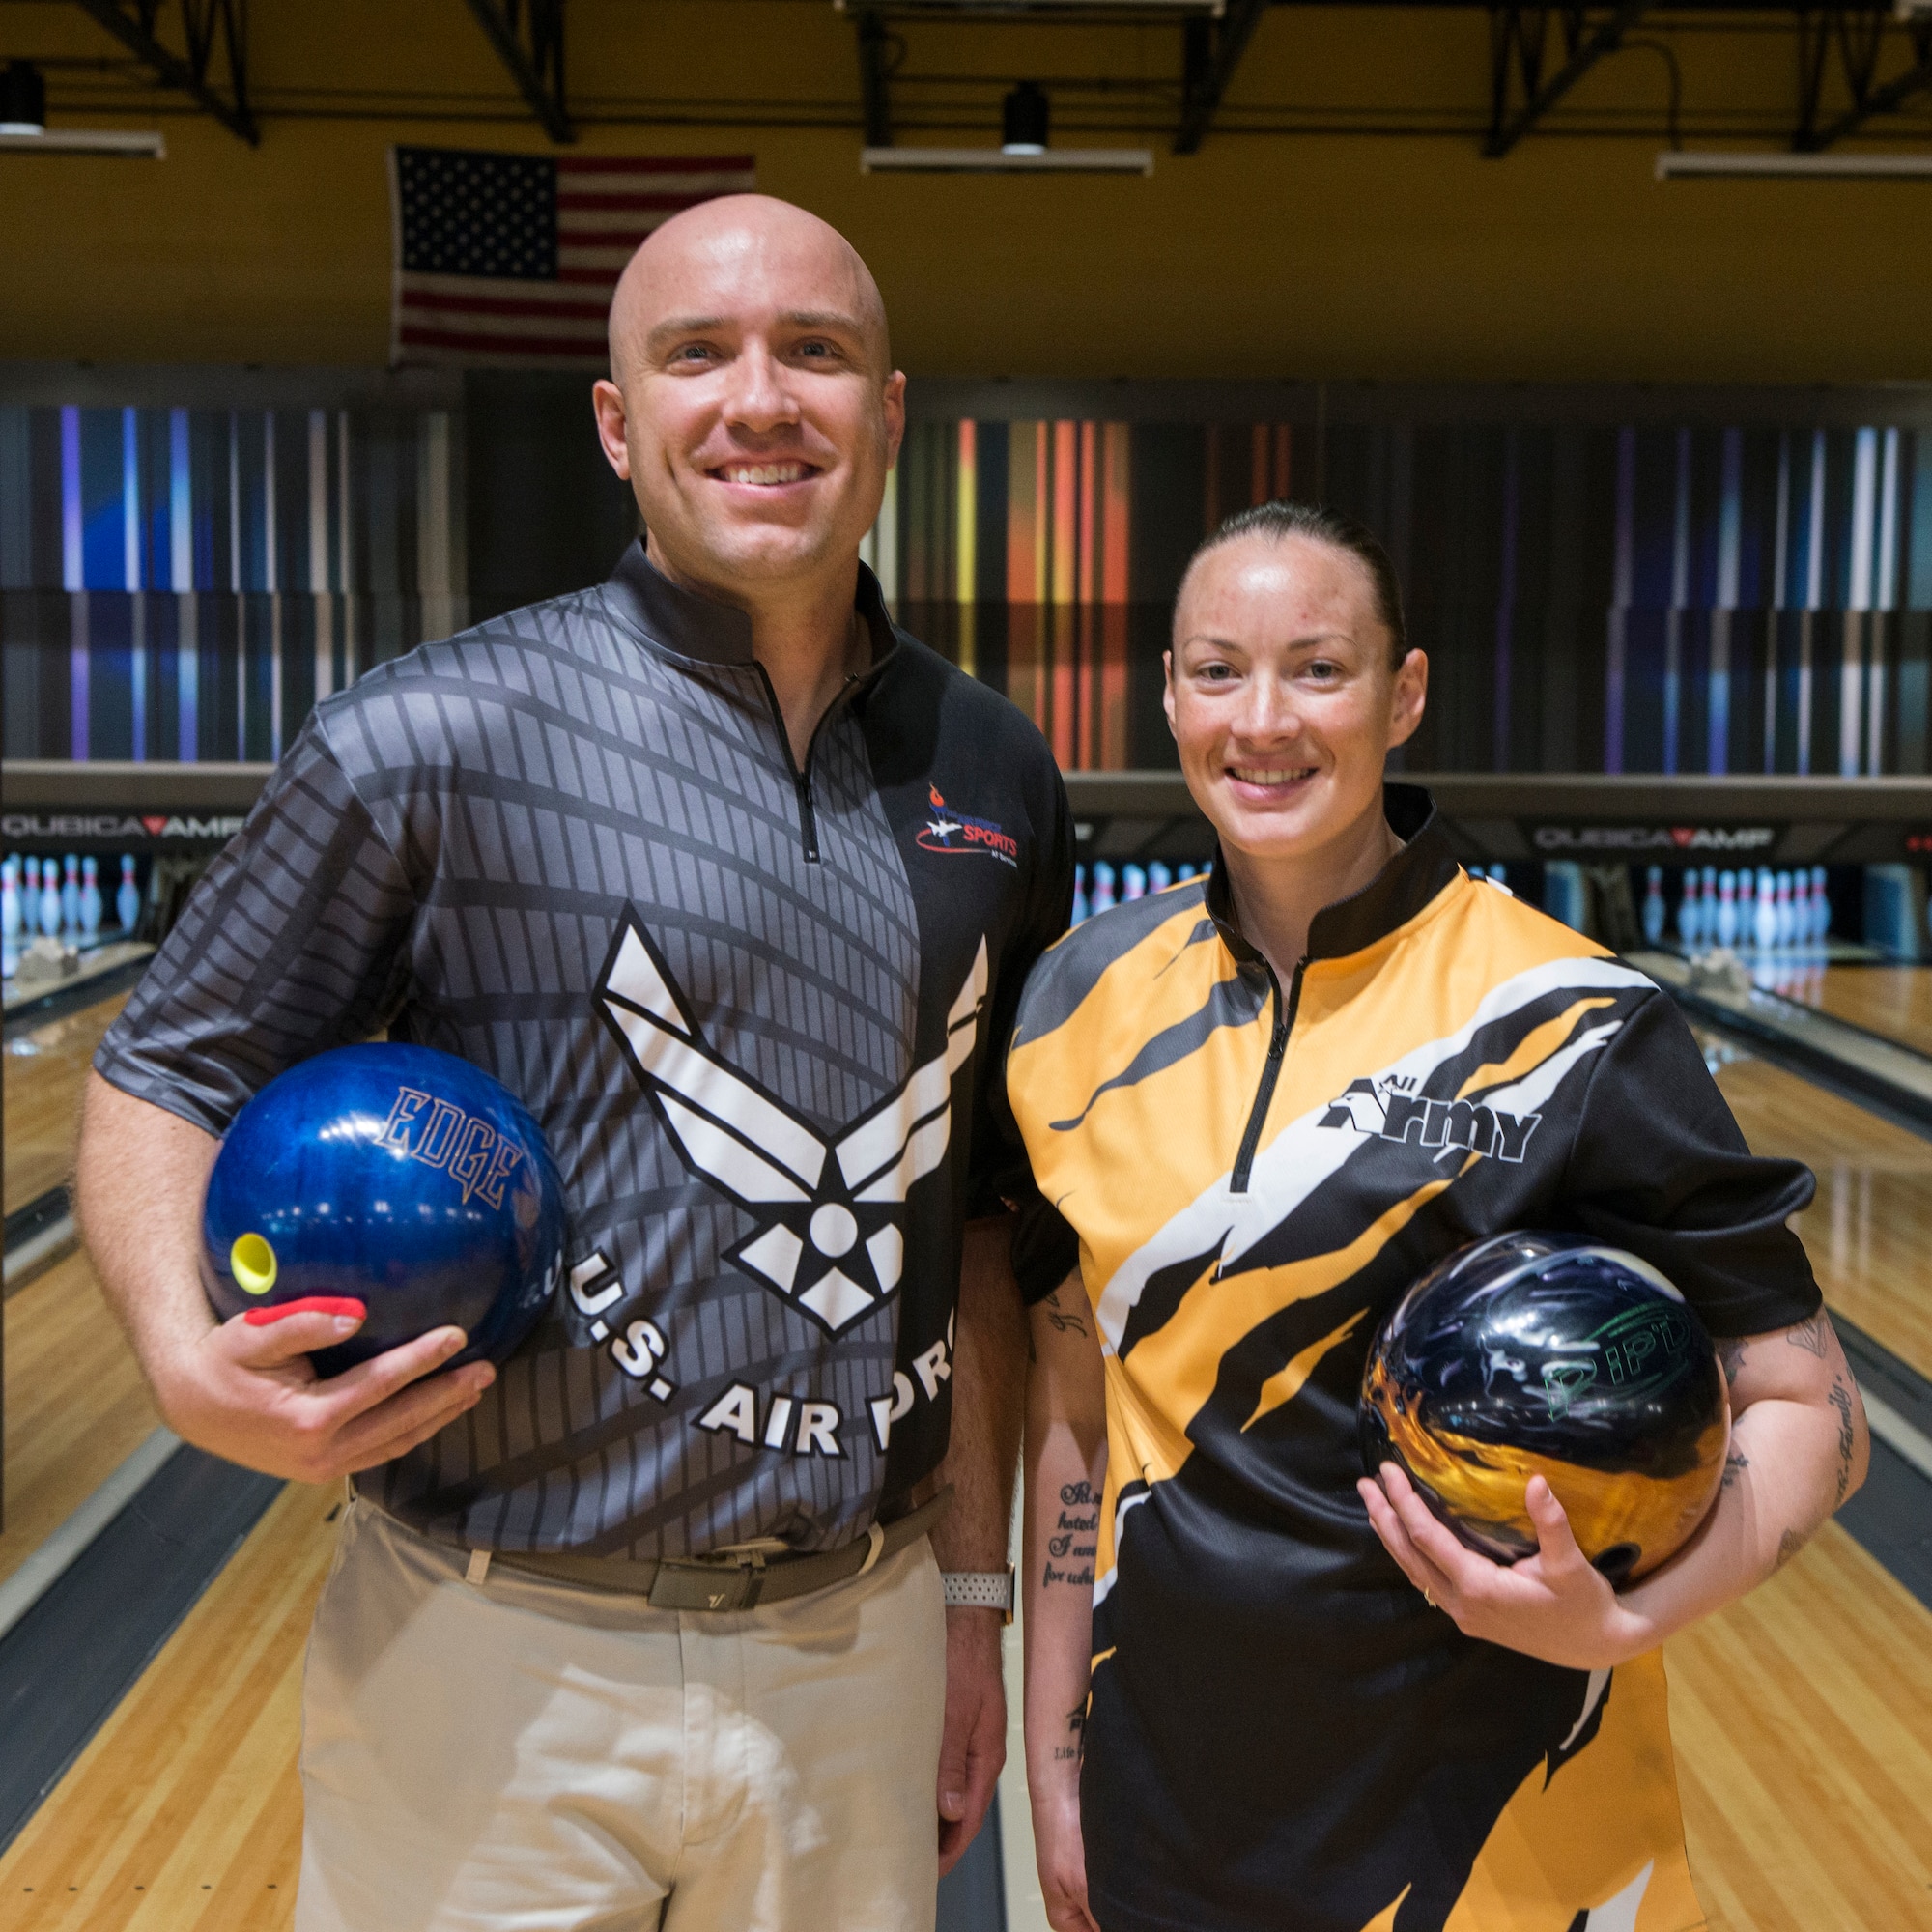 U.S. Air Force Staff Sgt. James McTaggart, assigned to the  Creech Air Force Base, Nev., (left), and U.S. Army Staff Sgt. Rose Aguilar, assigned to Fort Bliss, Texas, right, pose for a photo during the 2018 Armed Forces Bowling Championship at Ten Strike Bowling Center. Mc Taggart and Aguilar were the male and female first place winners of the competition. (U.S. Navy photo by Mass Communication Specialist Seaman Michael DiGabriele/Released)